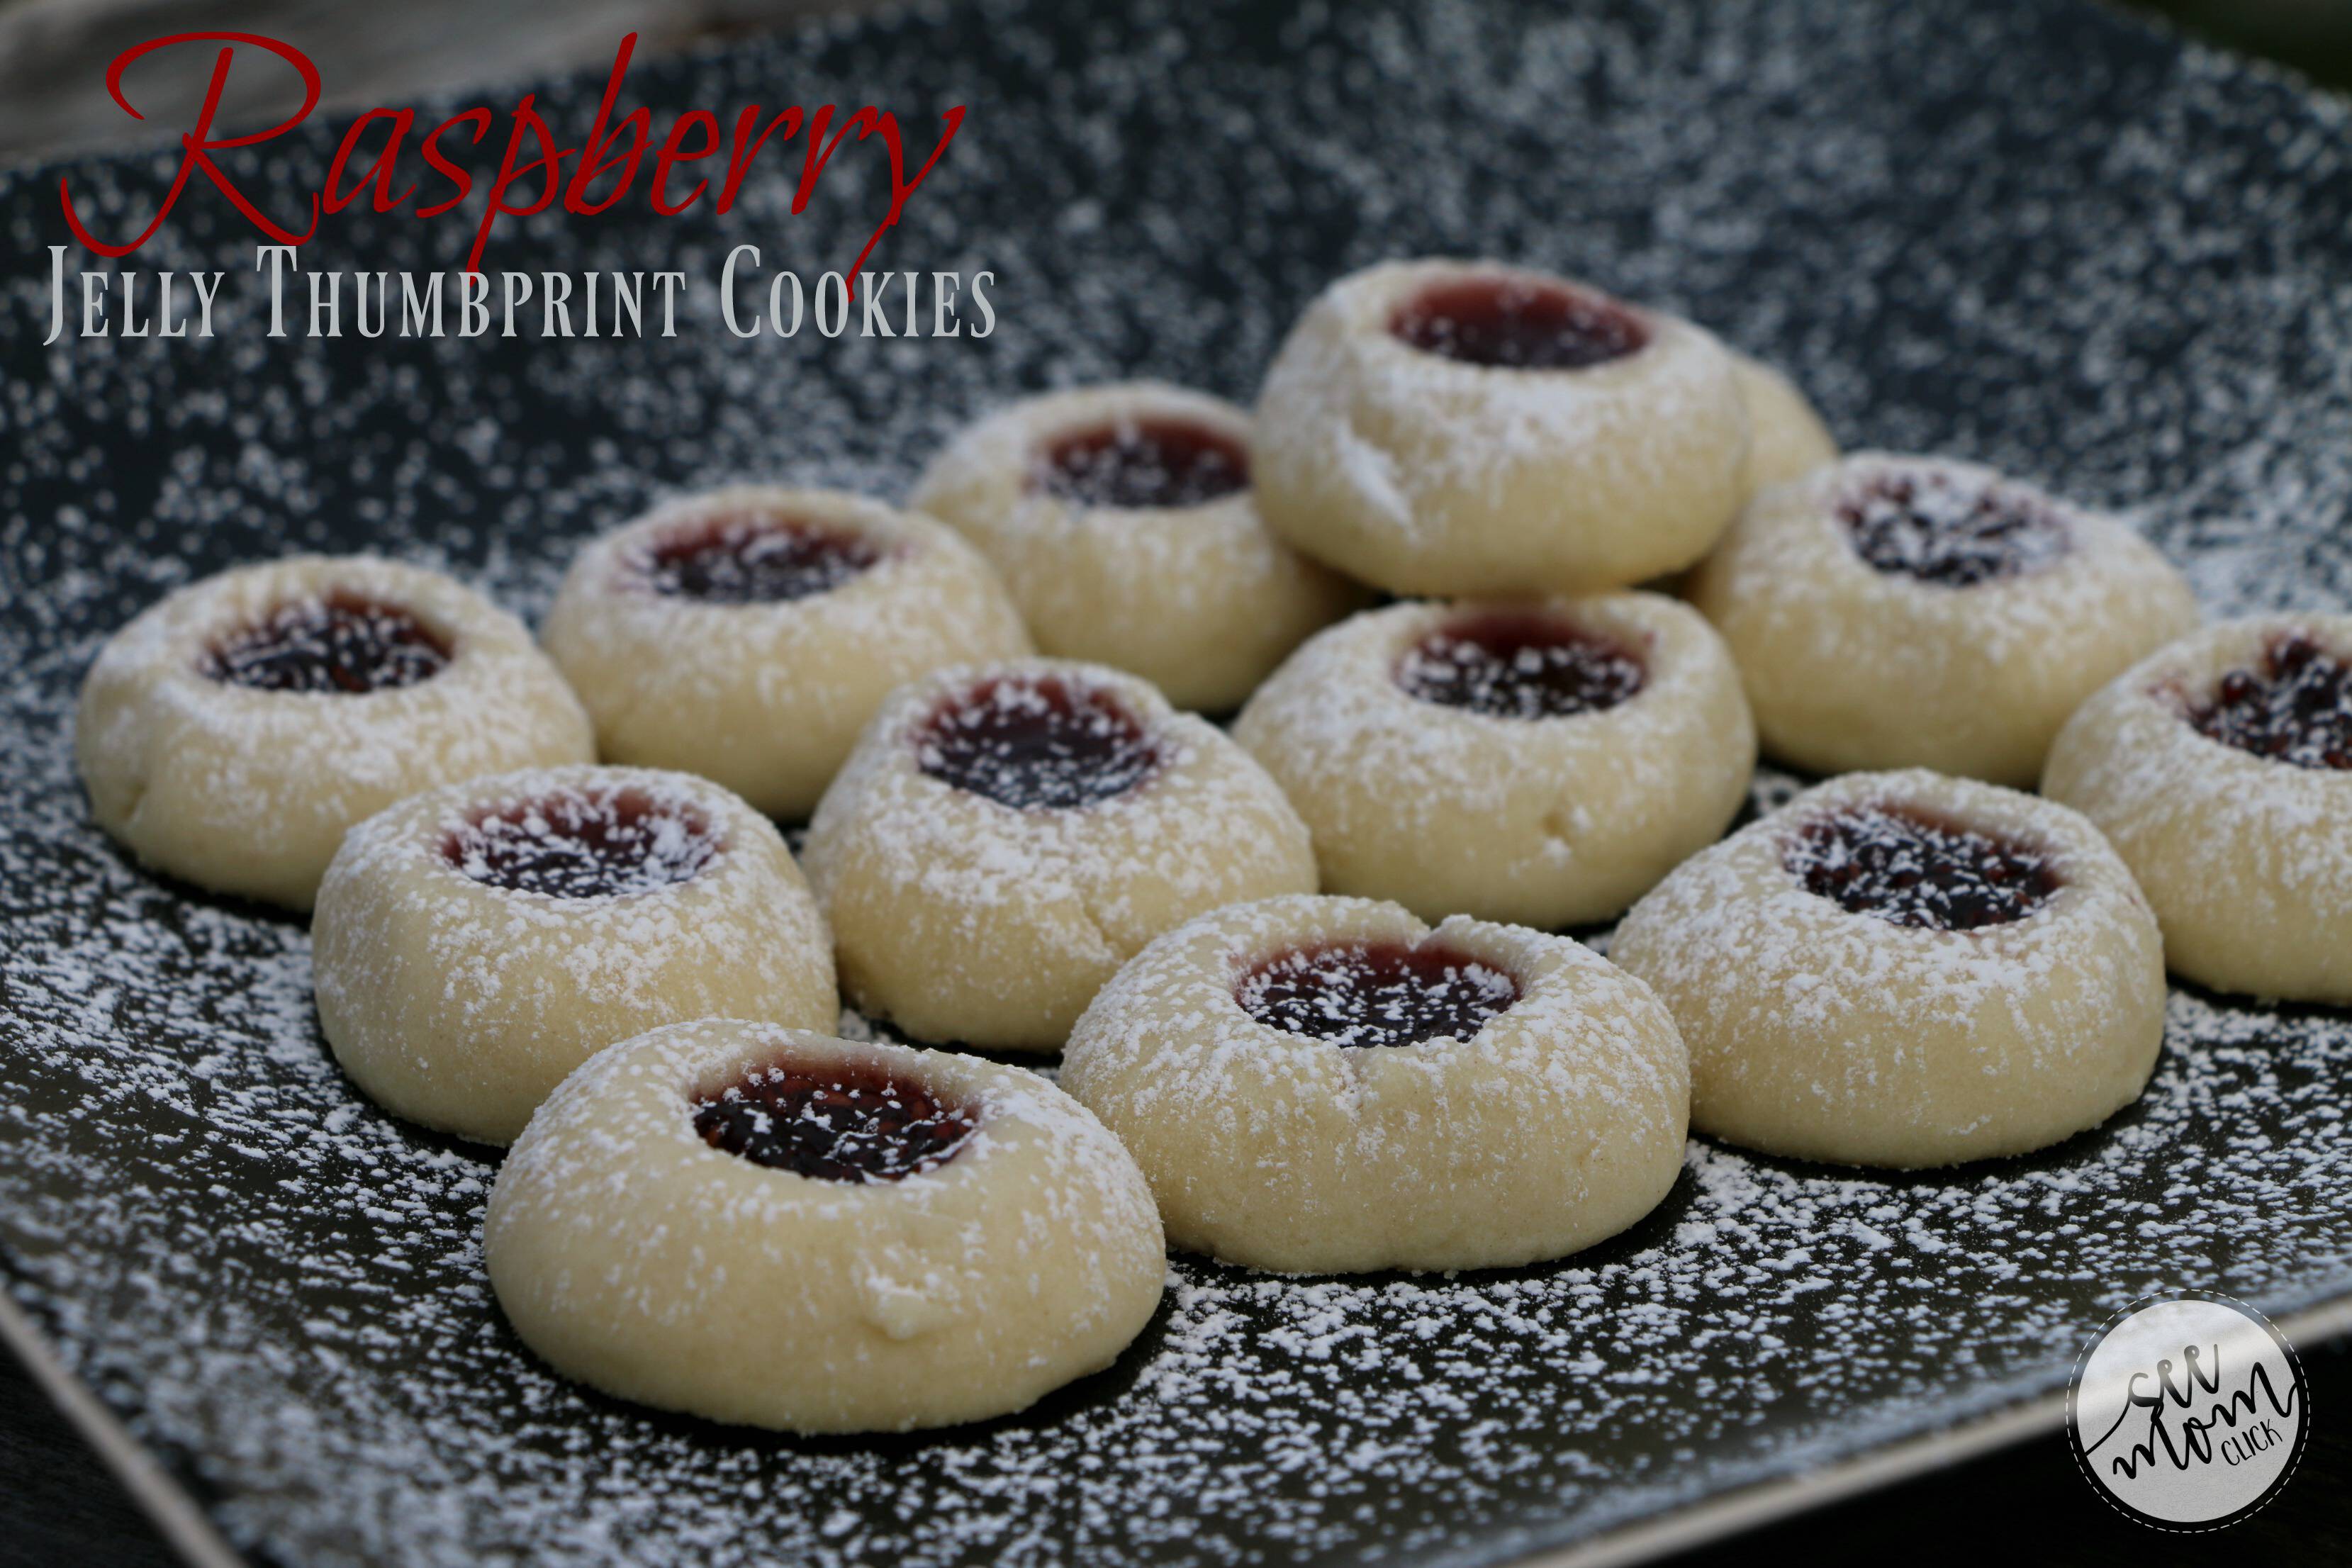 This Raspberry Jelly Thumbprint Cookie Recipe is a family tradition for me. My Mom has made these Christmas cookies every year since I was a kid. They're easy and delicious! And that pretty red filling makes them perfect for Valentine's Day, too!